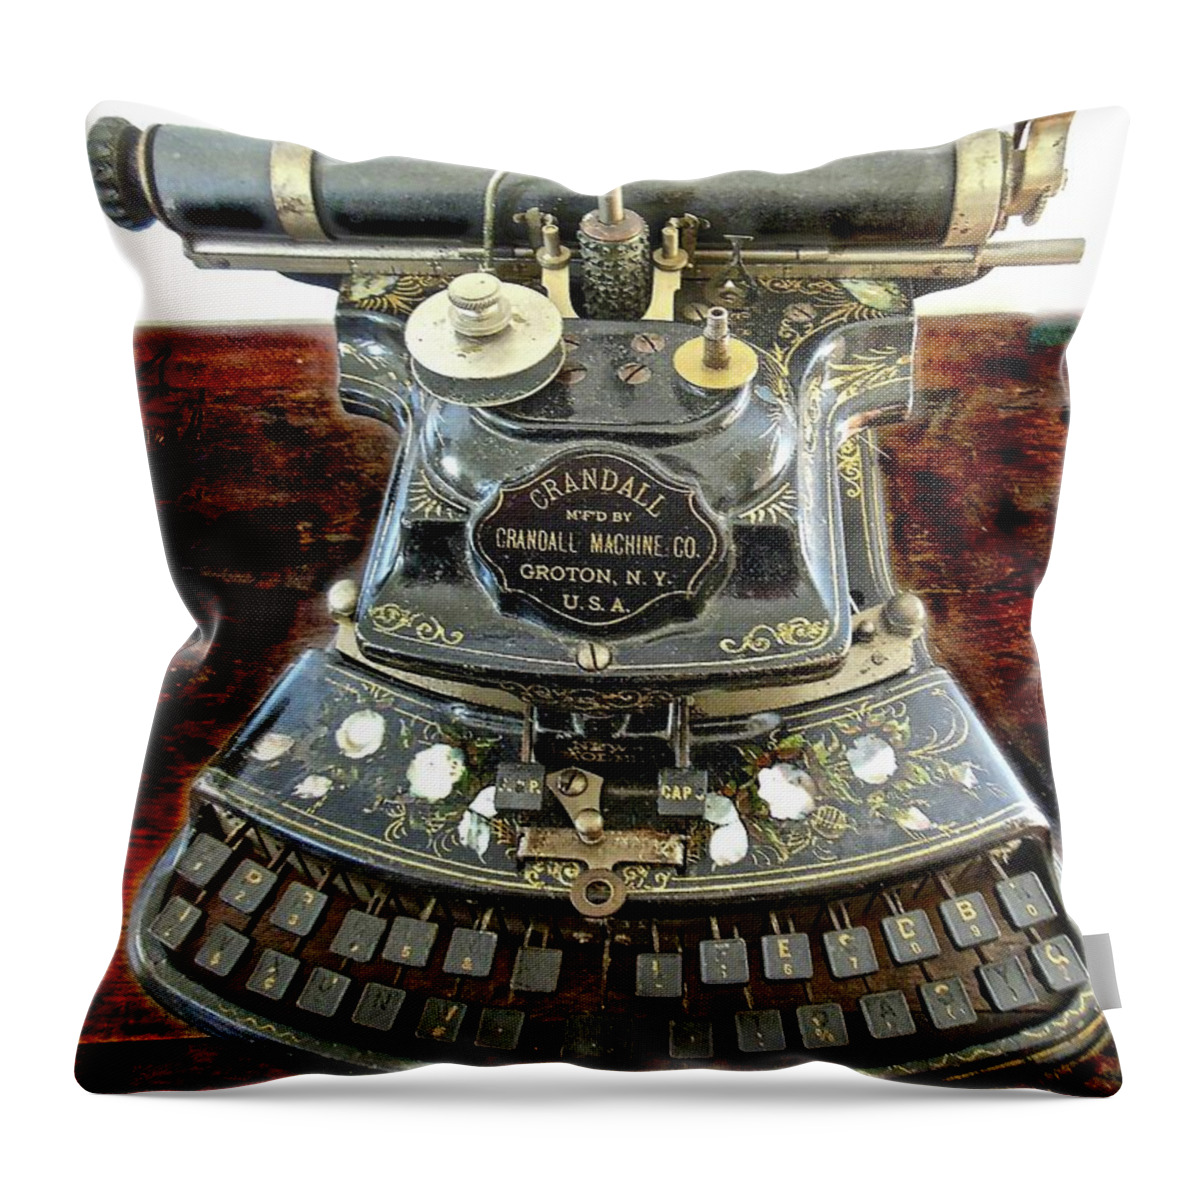 Early American Tools Throw Pillow featuring the photograph Crandall Type Writer 1893 by Joan Reese